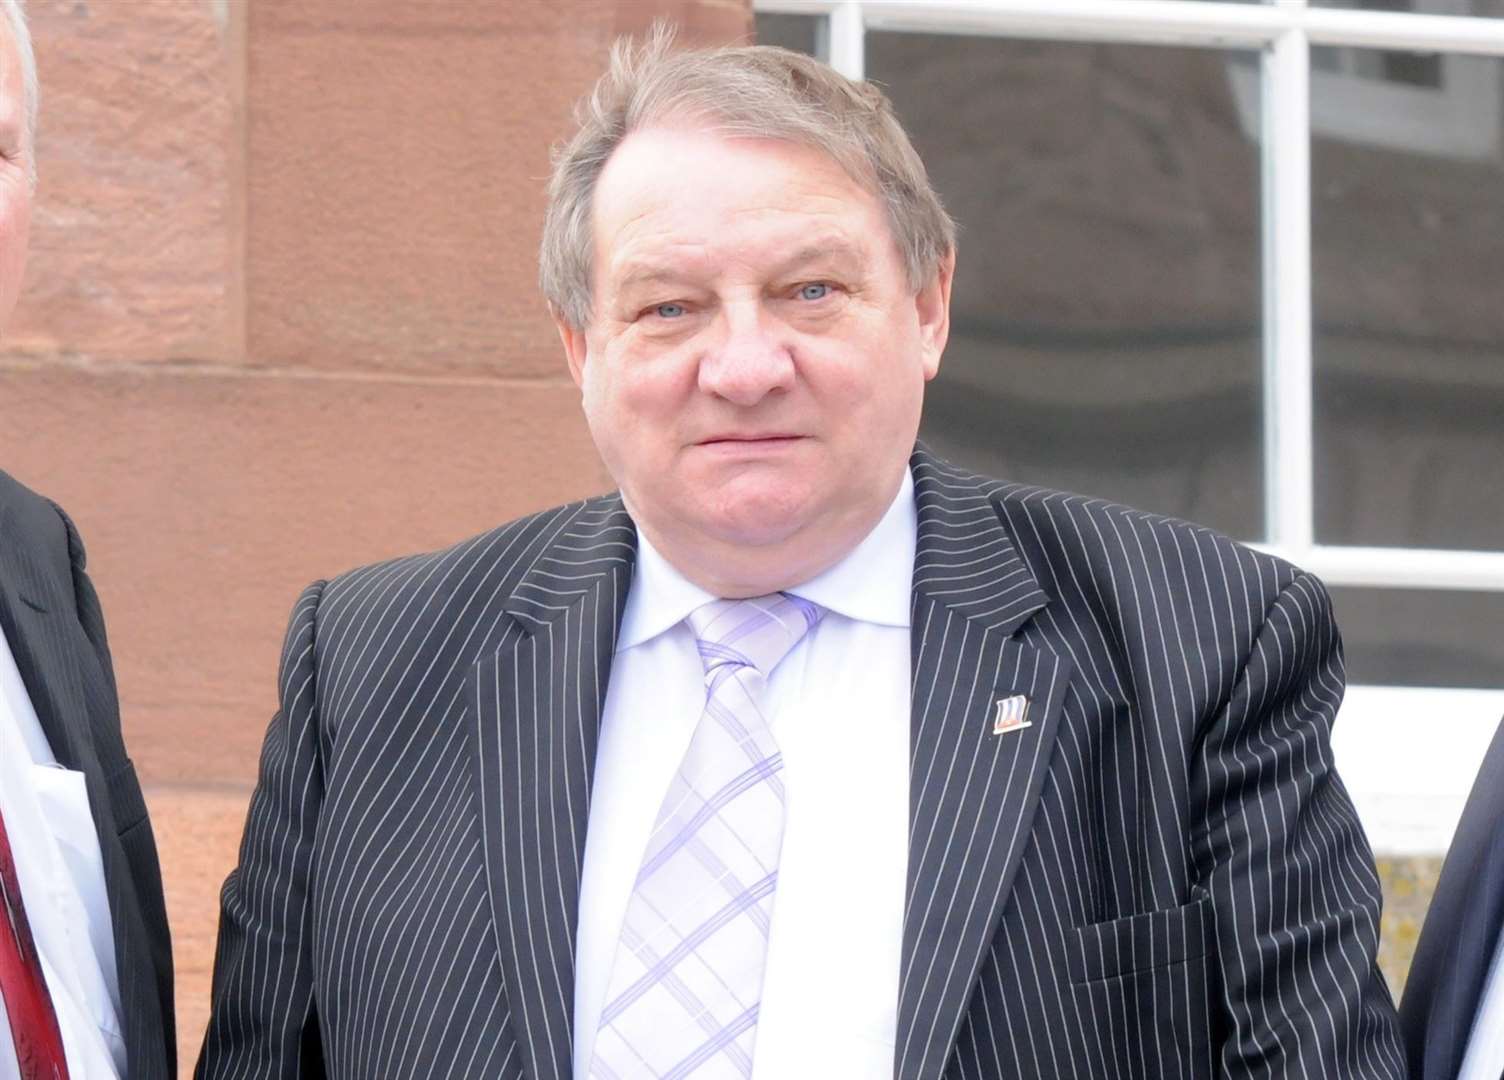 Former councillor John Holden has died aged 74.